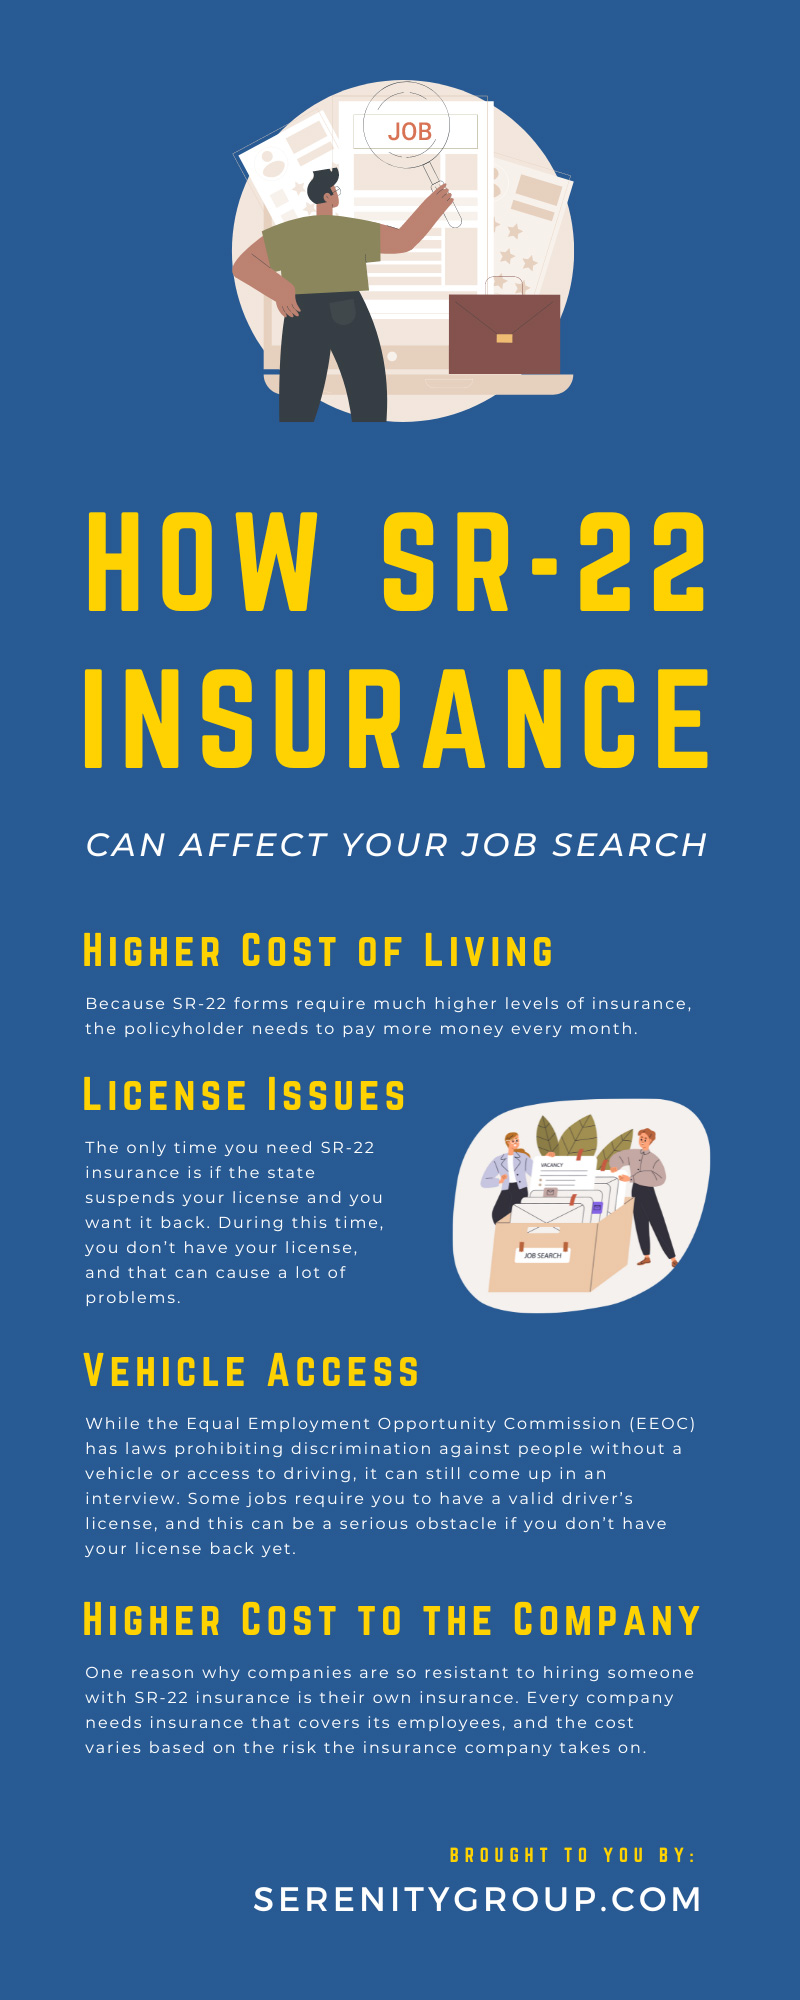 How SR-22 Insurance Can Affect Your Job Search